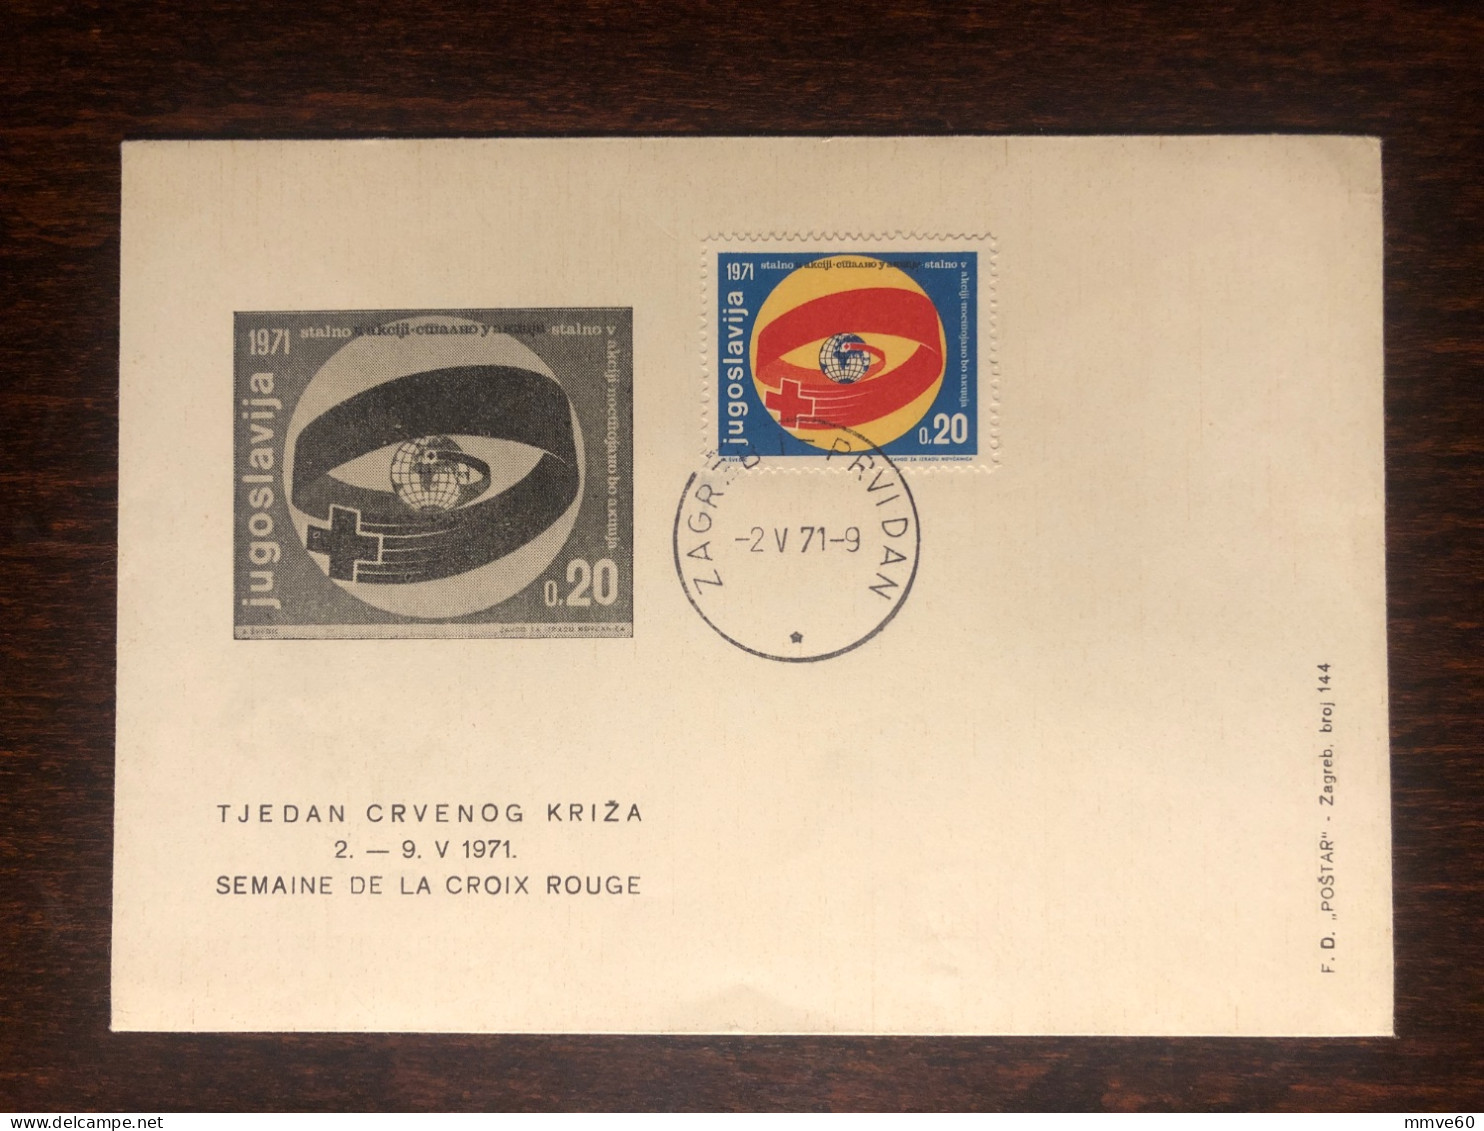 YUGOSLAVIA FDC COVER 1971 YEAR RED CROSS HEALTH MEDICINE STAMPS - FDC